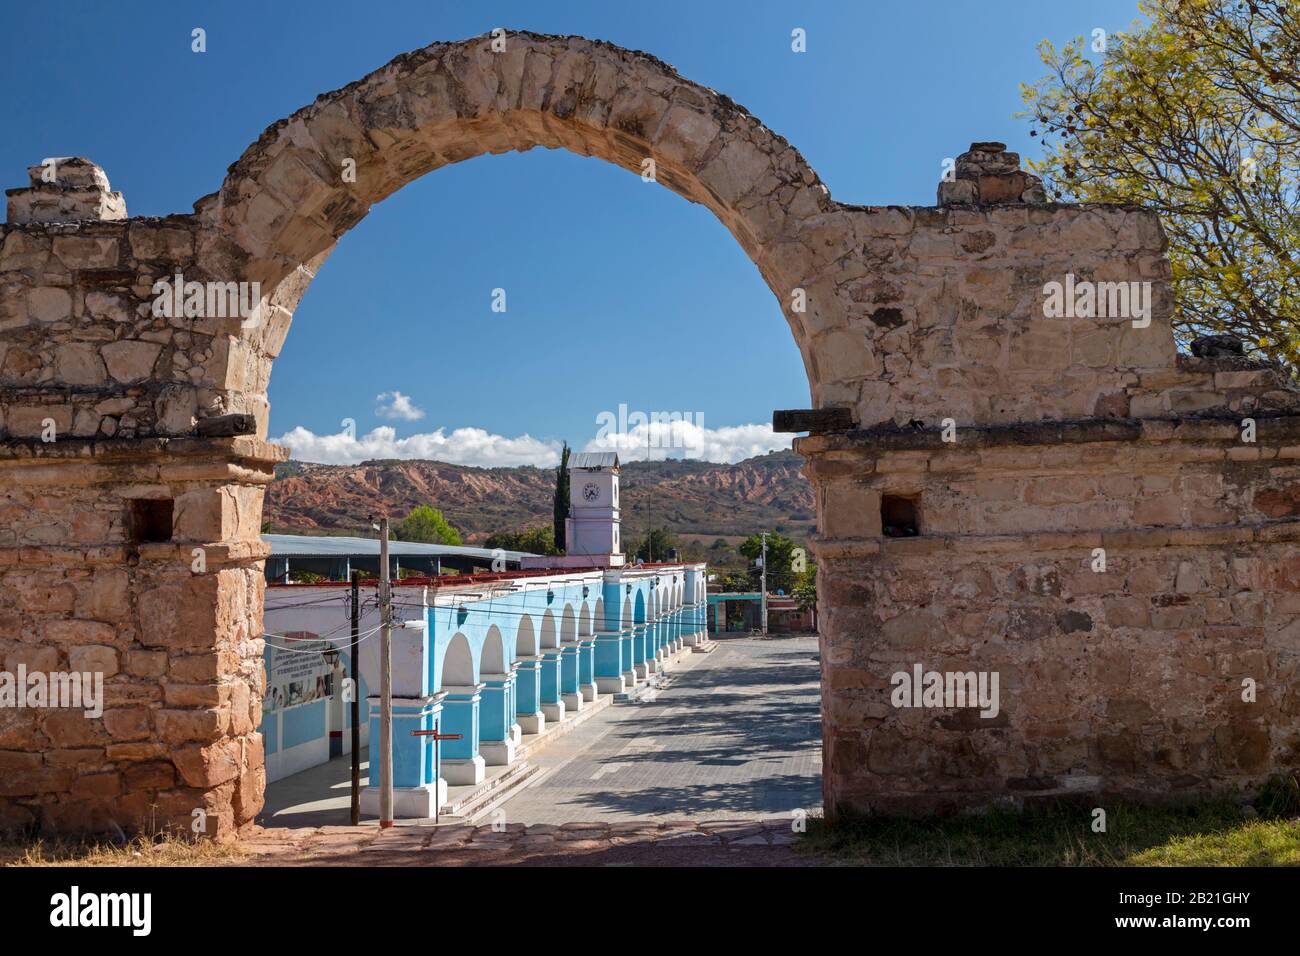 Yanhuitlan, Oaxaca, Mexico - The Presidencia Municipal, the town's government offices, framed by an arch at the Templo de Santo Domingo, a 16th centur Stock Photo